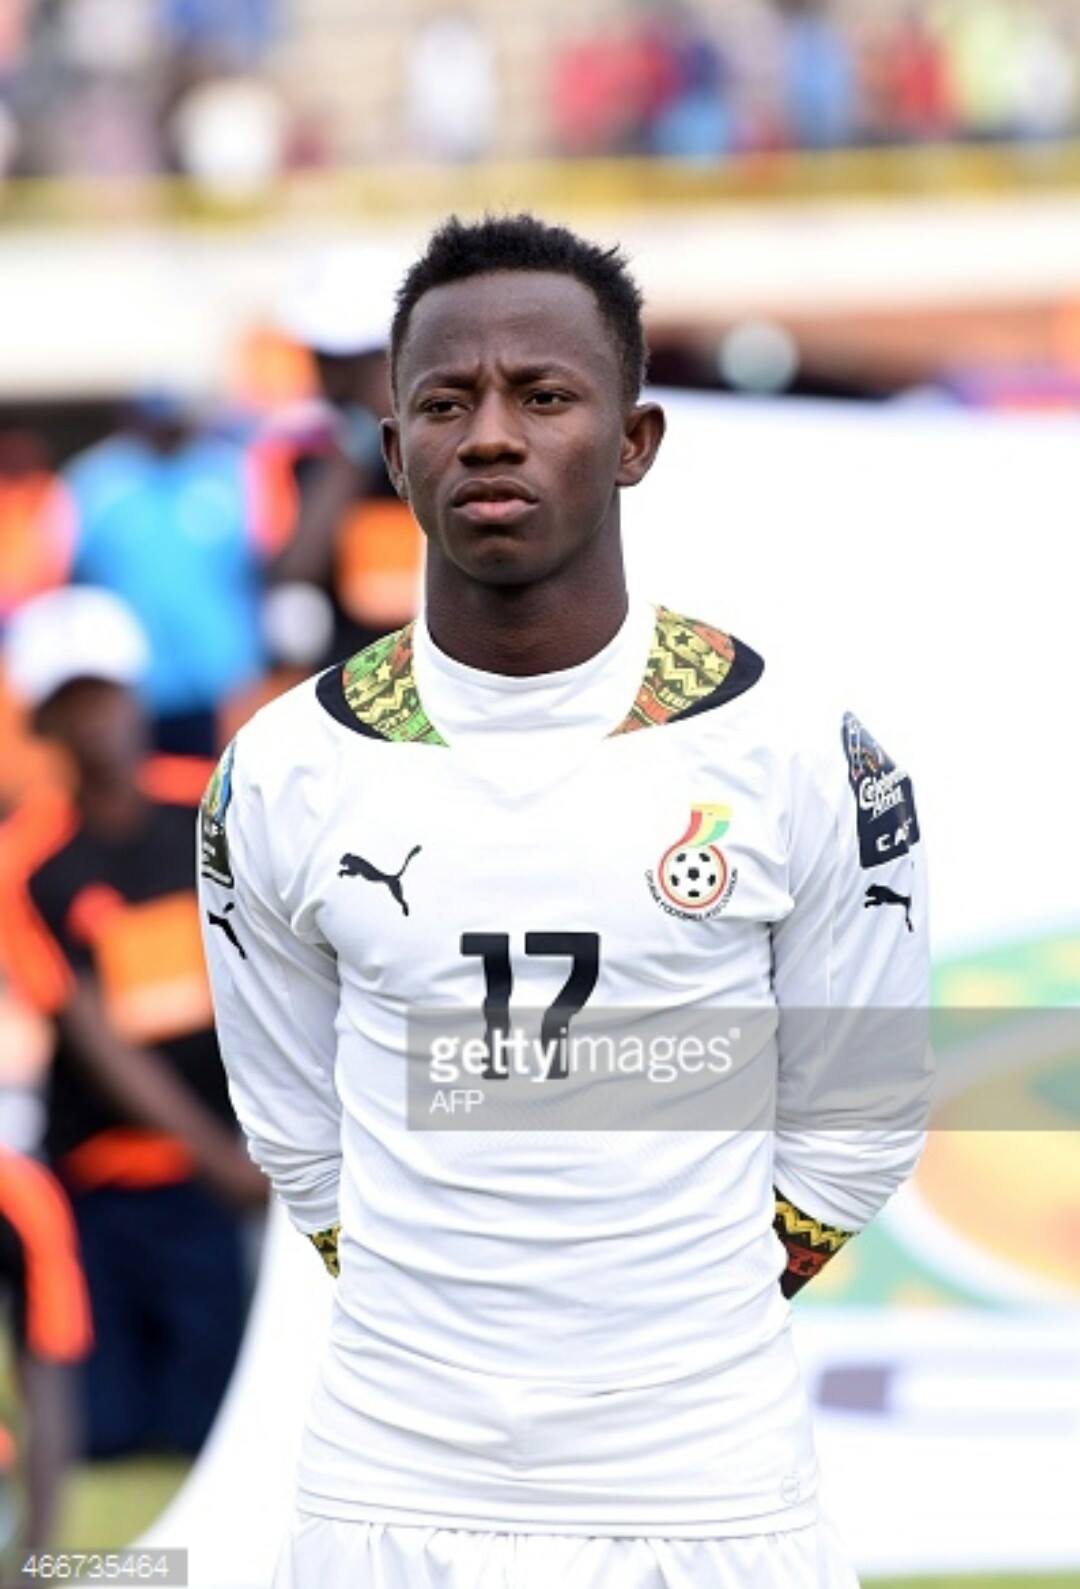 EXCLUSIVE: Ghana youngster Yaw Yeboah handed Black stars call up as replacement for injured Jeffery Schlupp